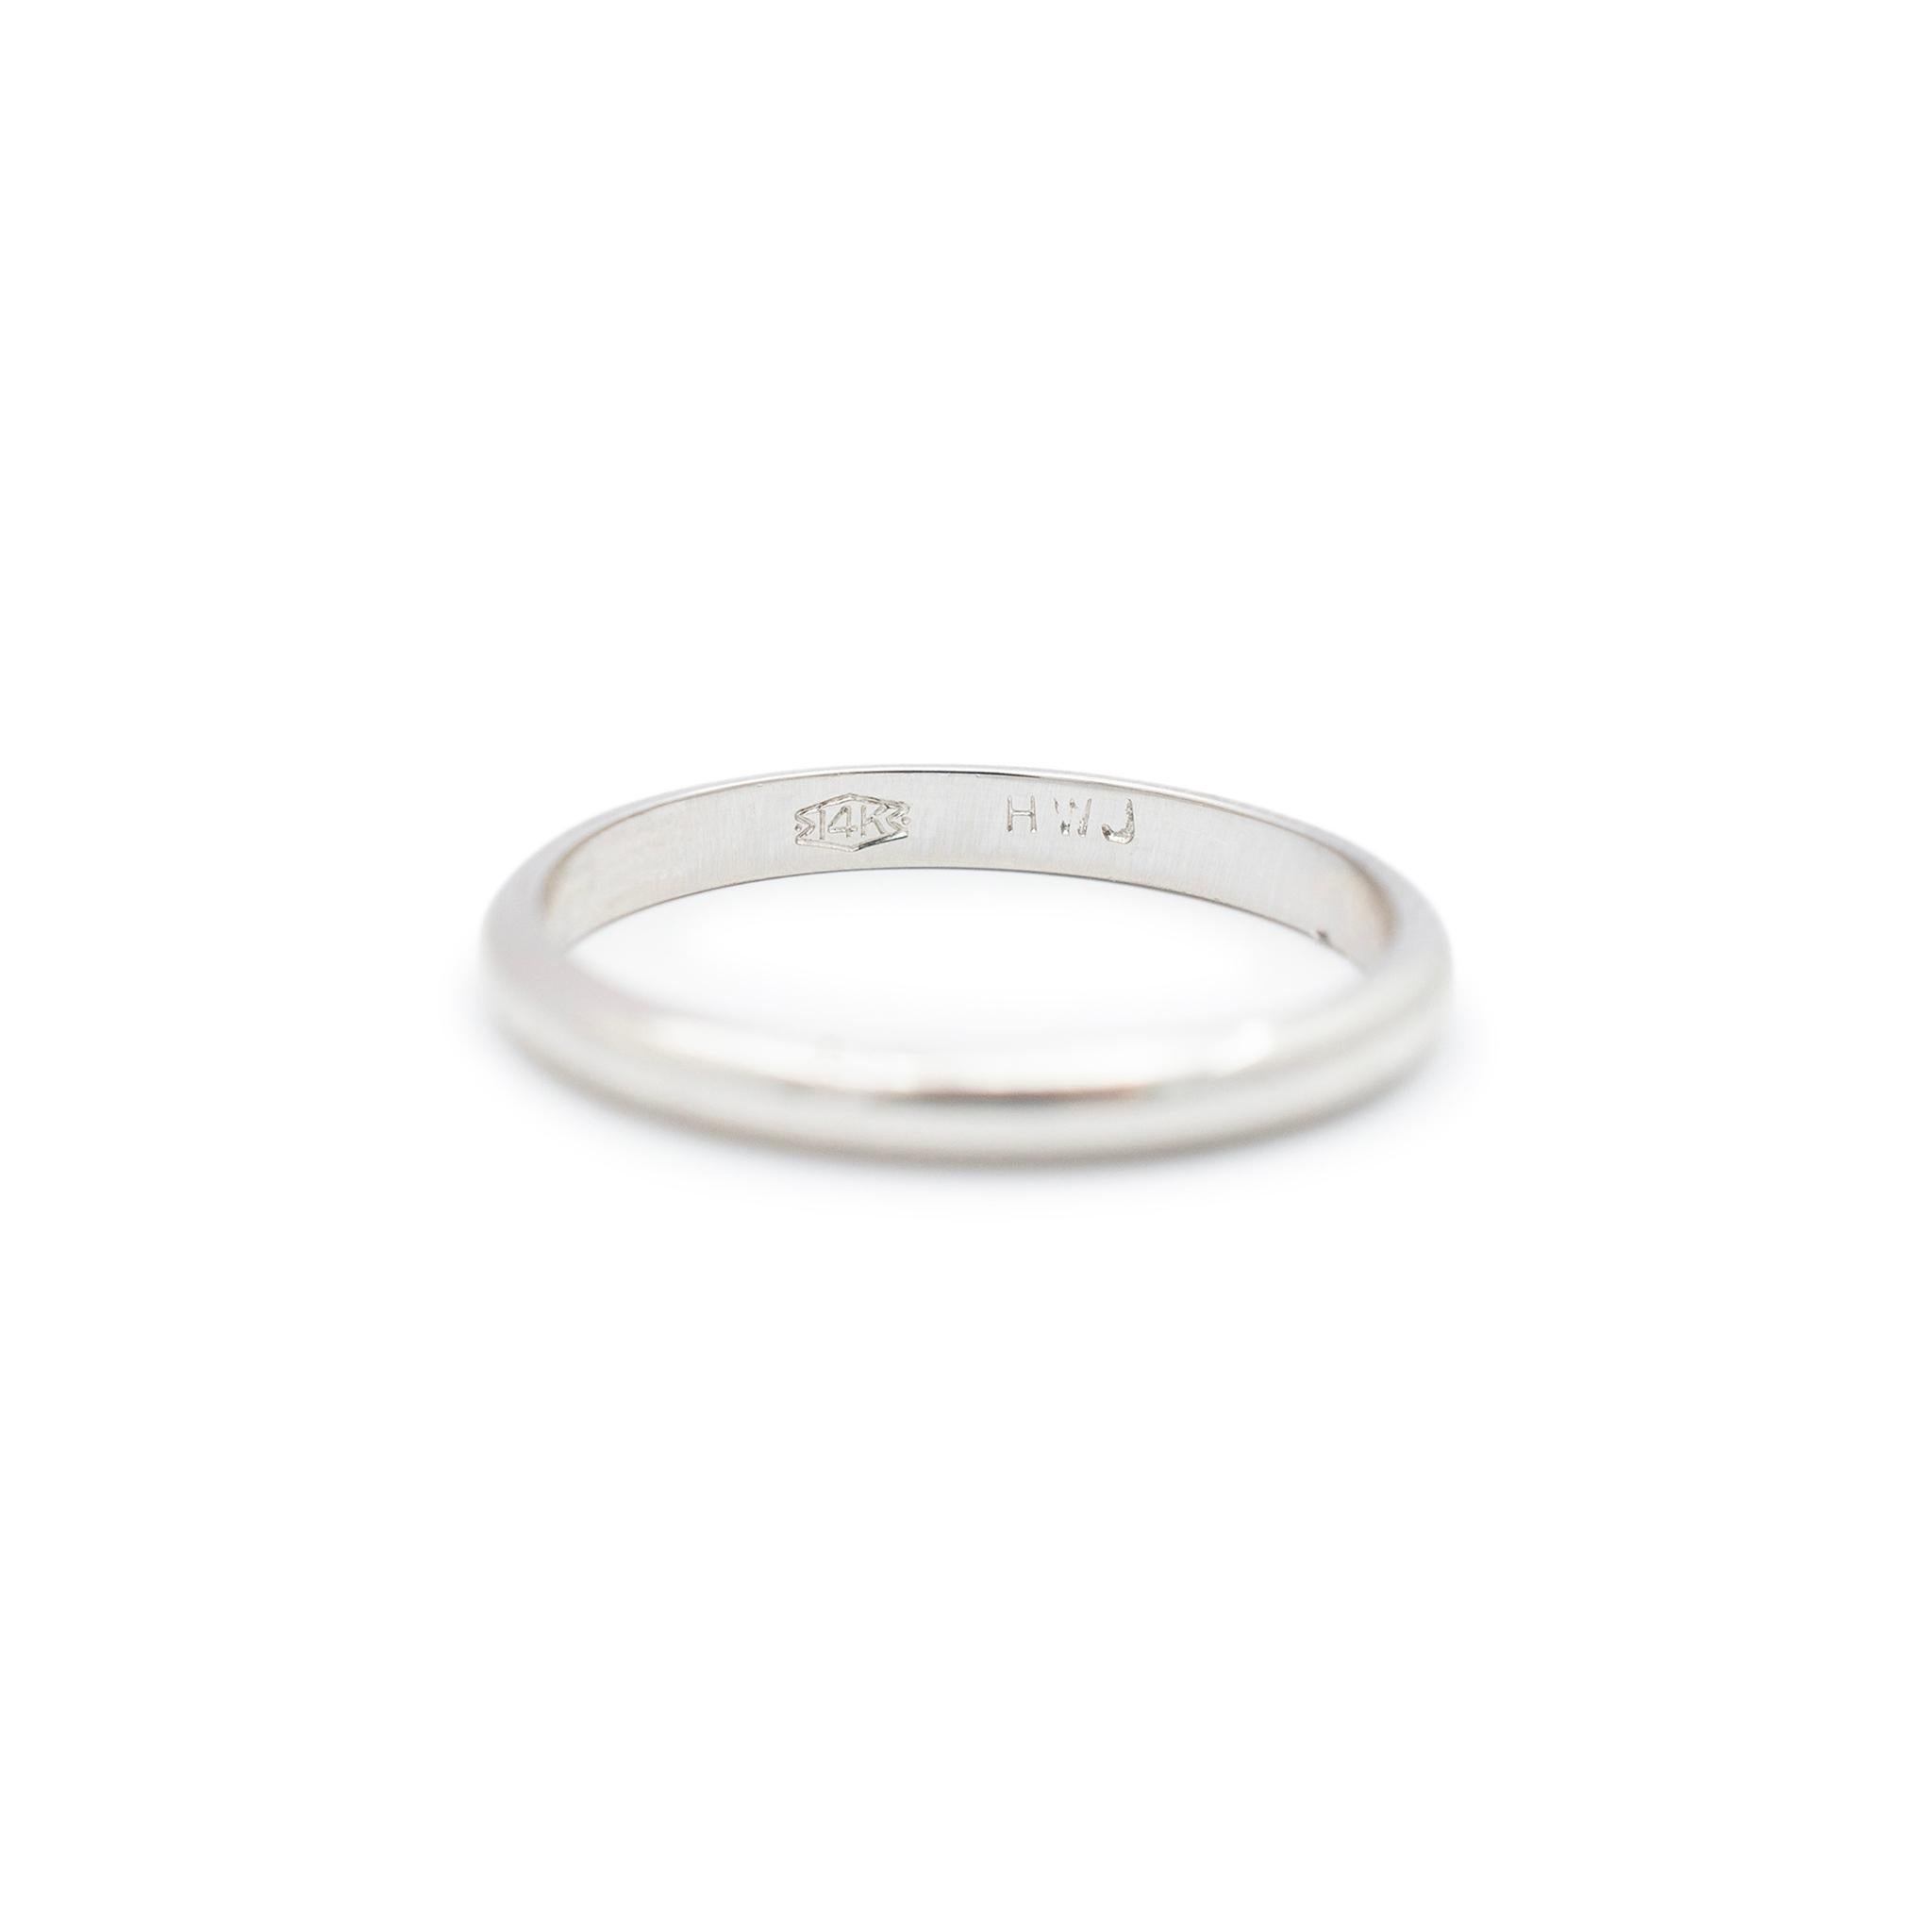 Gender: Unisex

Metal Type: 14K White Gold

Size: 7

Shank Width: 2.40 mm

Weight: 2.00 grams

14K white gold wedding band with a half-round shank. Engraved with 